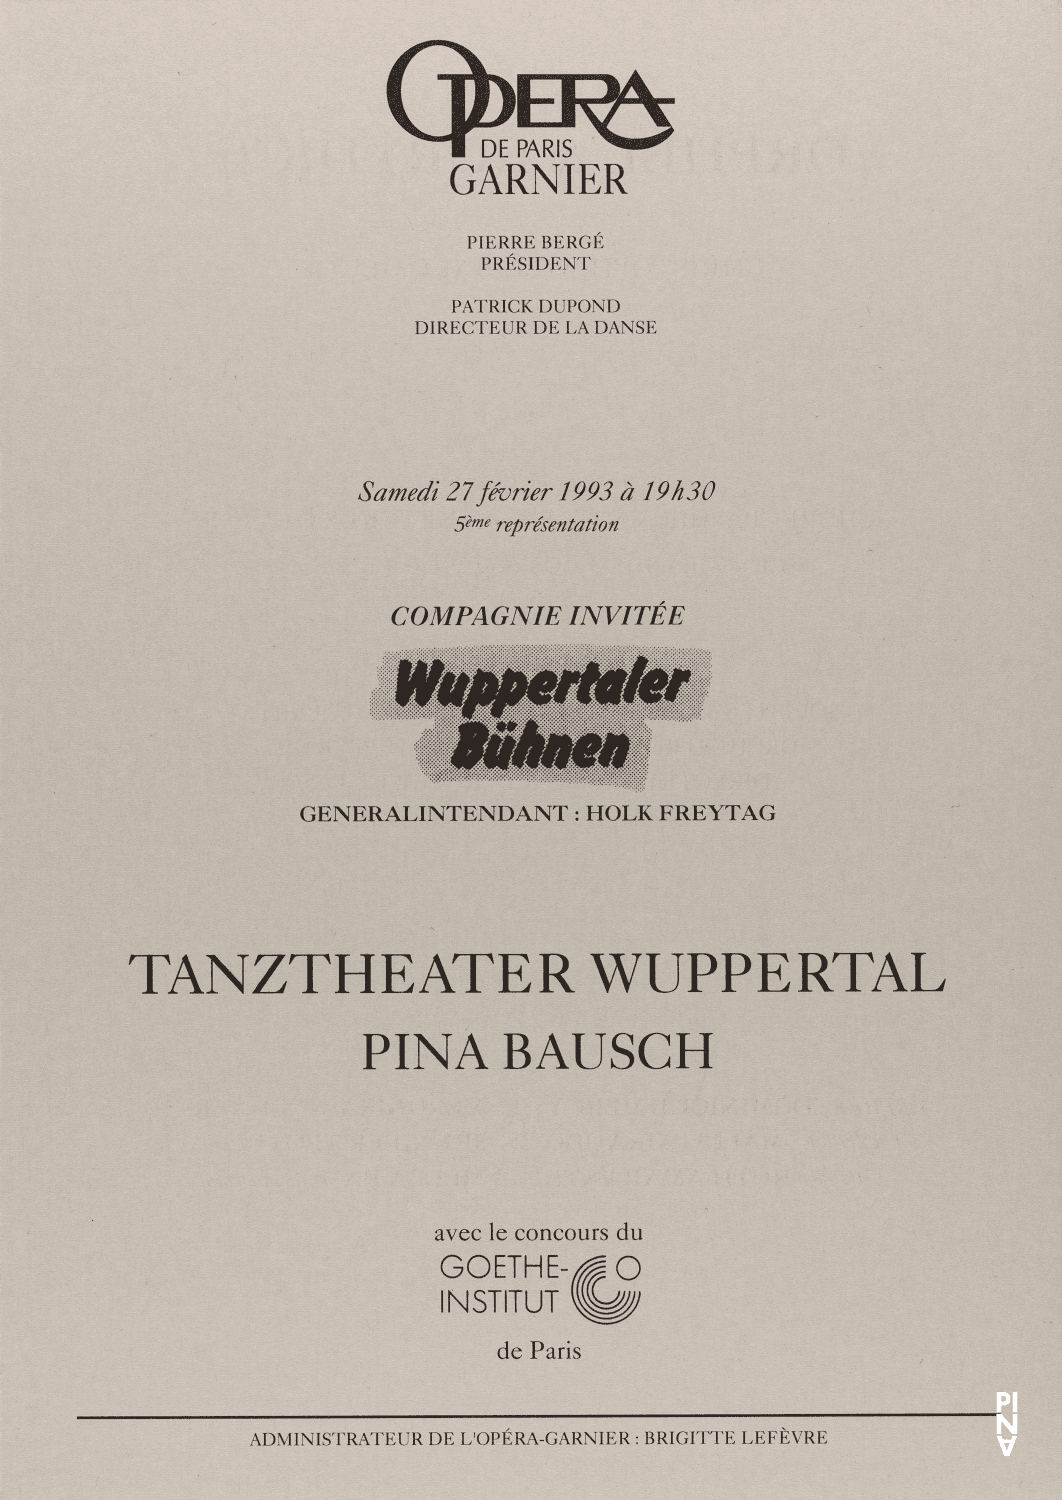 Evening leaflet for “Orpheus und Eurydike” by Pina Bausch with Tanztheater Wuppertal in in Paris, Feb. 27, 1993